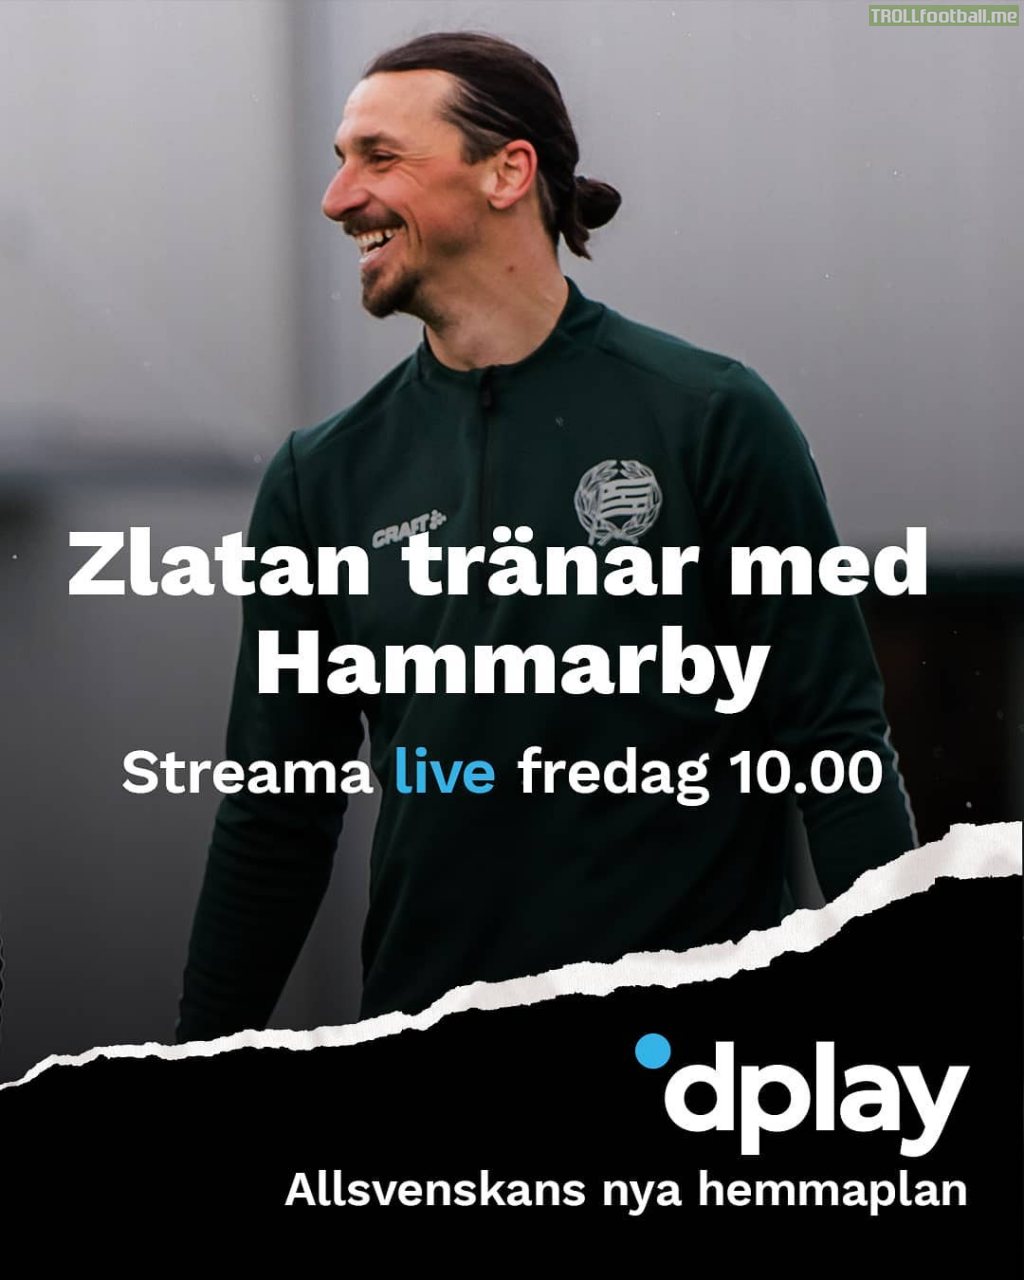 Zlatan Ibrahimović to play a scrimmage with Swedish club Hammarby IF tomorrow (April 24, 2020) at 10.00 CET. The game will be aired live and free for all online.